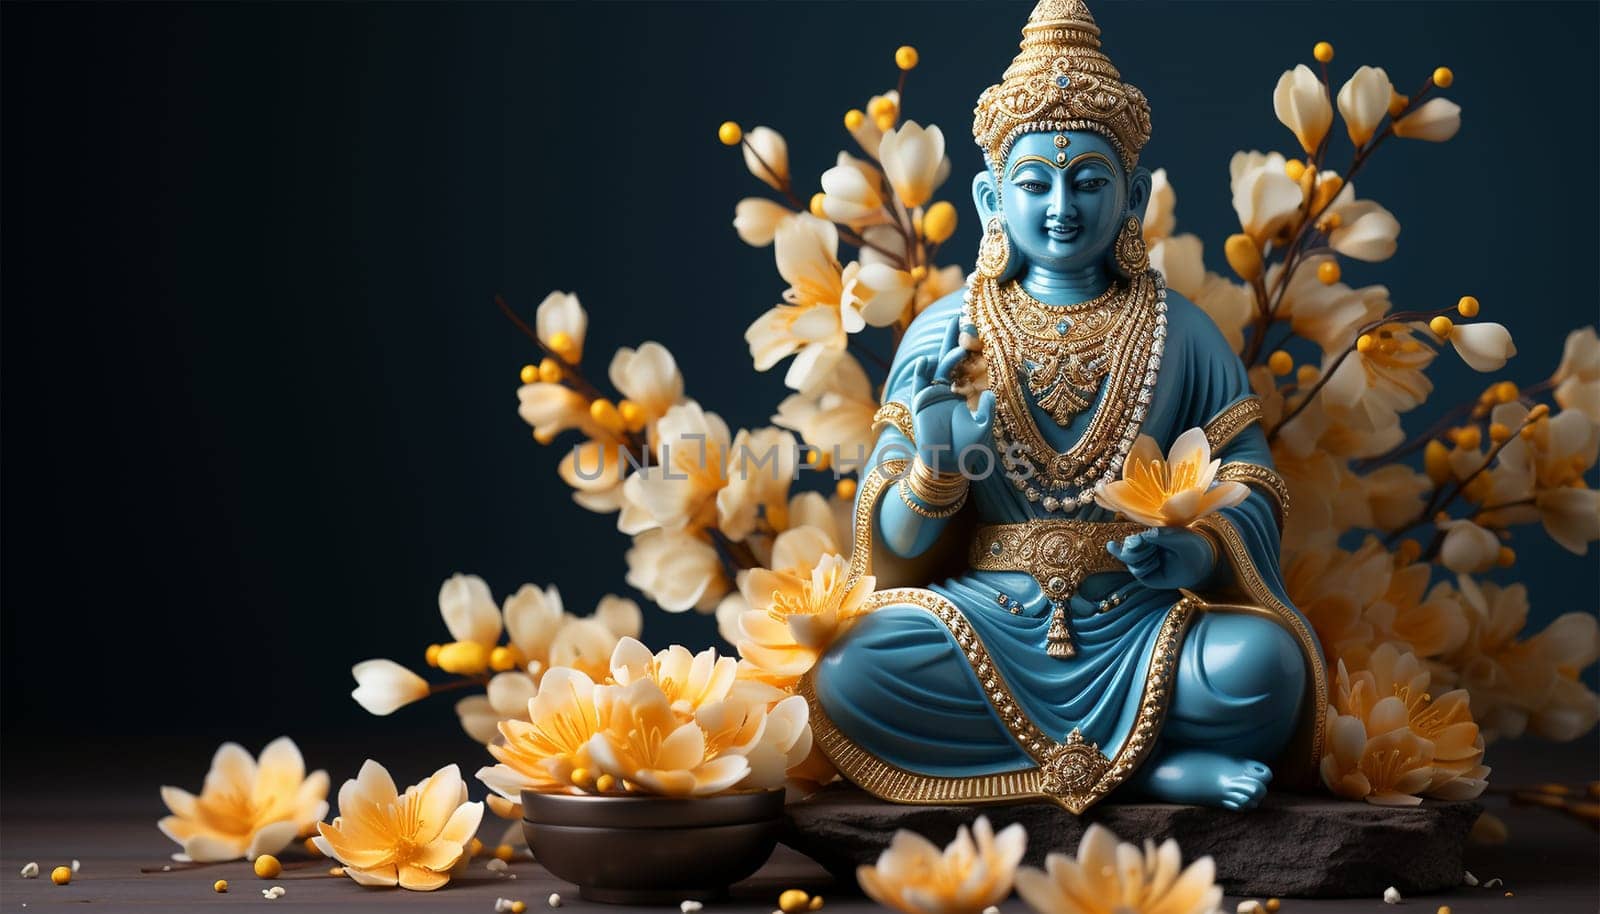 Hindu god. Vishnu, Indian lord of Hinduism. Hari god of ancient India. Hindu deity sitting on lotus flower, holding attributes. Traditional holy divinity. illustration copy space by Annebel146